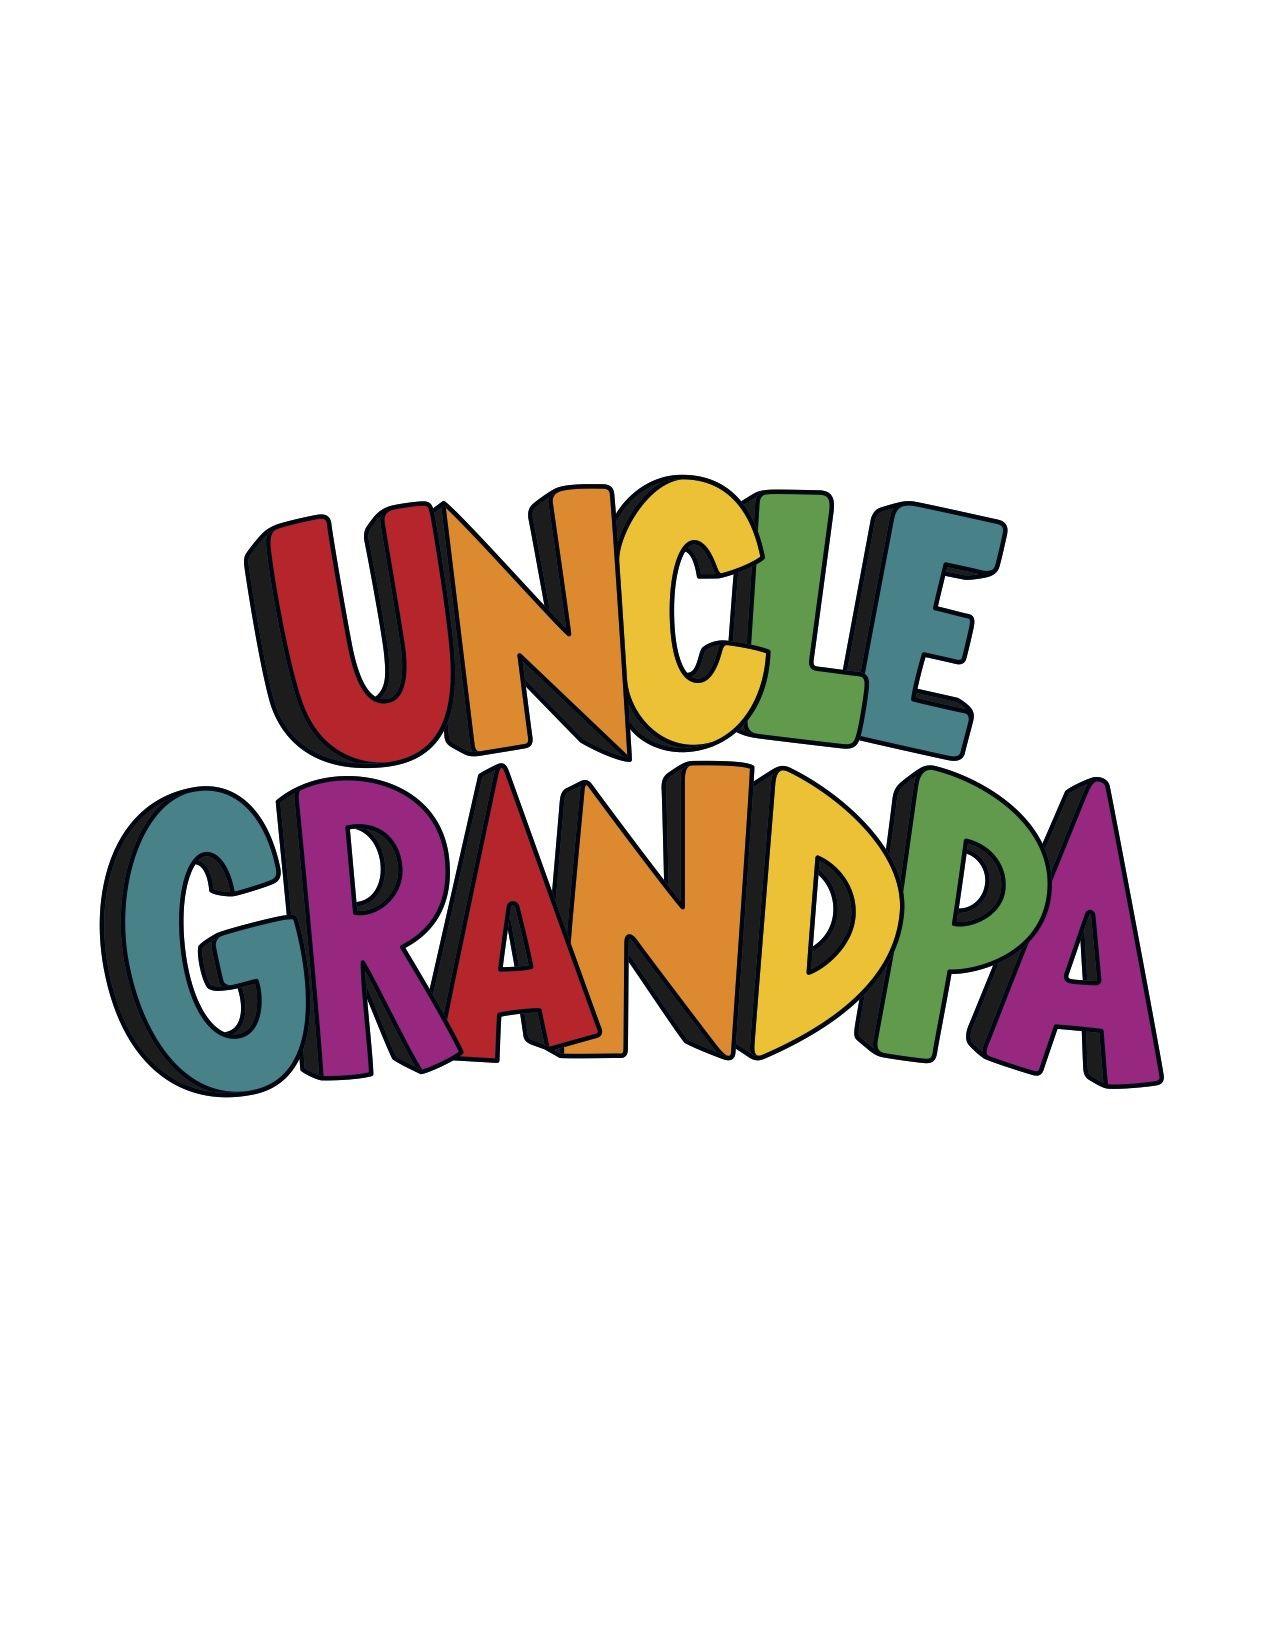 Uncle grandpa. Дядя Деда. Дядя Деда лого.